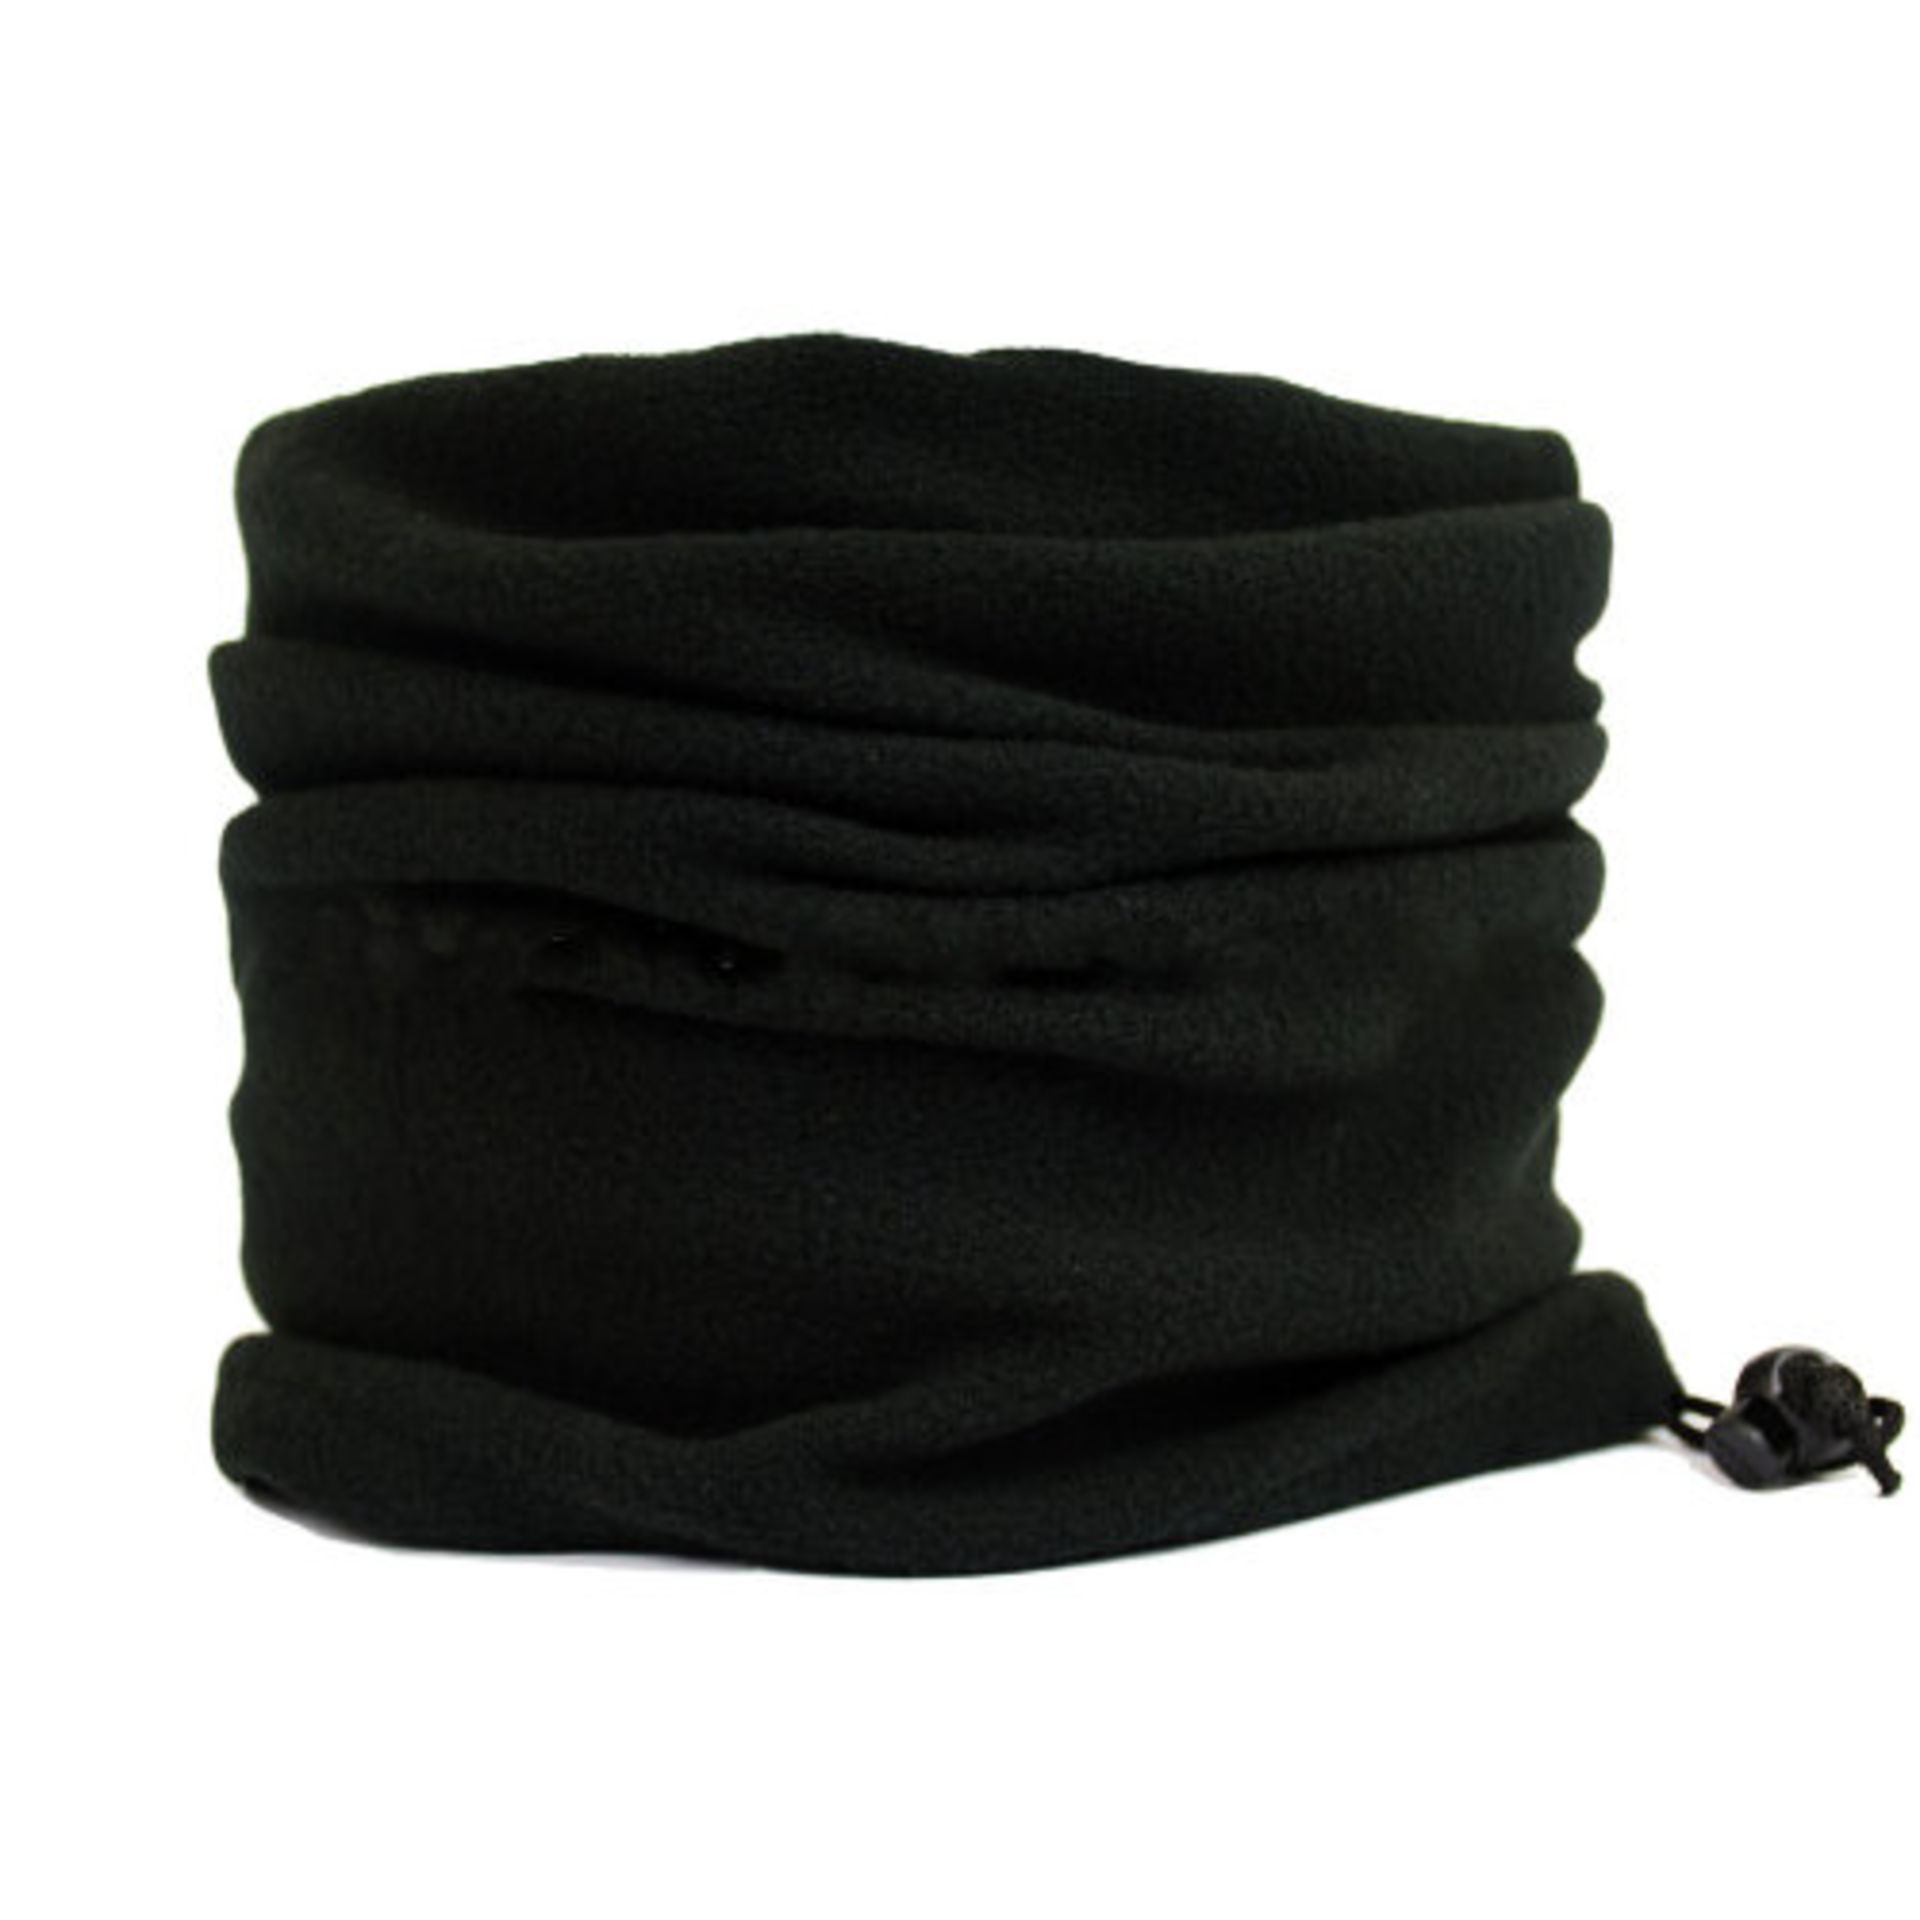 10 X New Packaged VBIGER Neck Warmer Snood With Adjustable Strap.